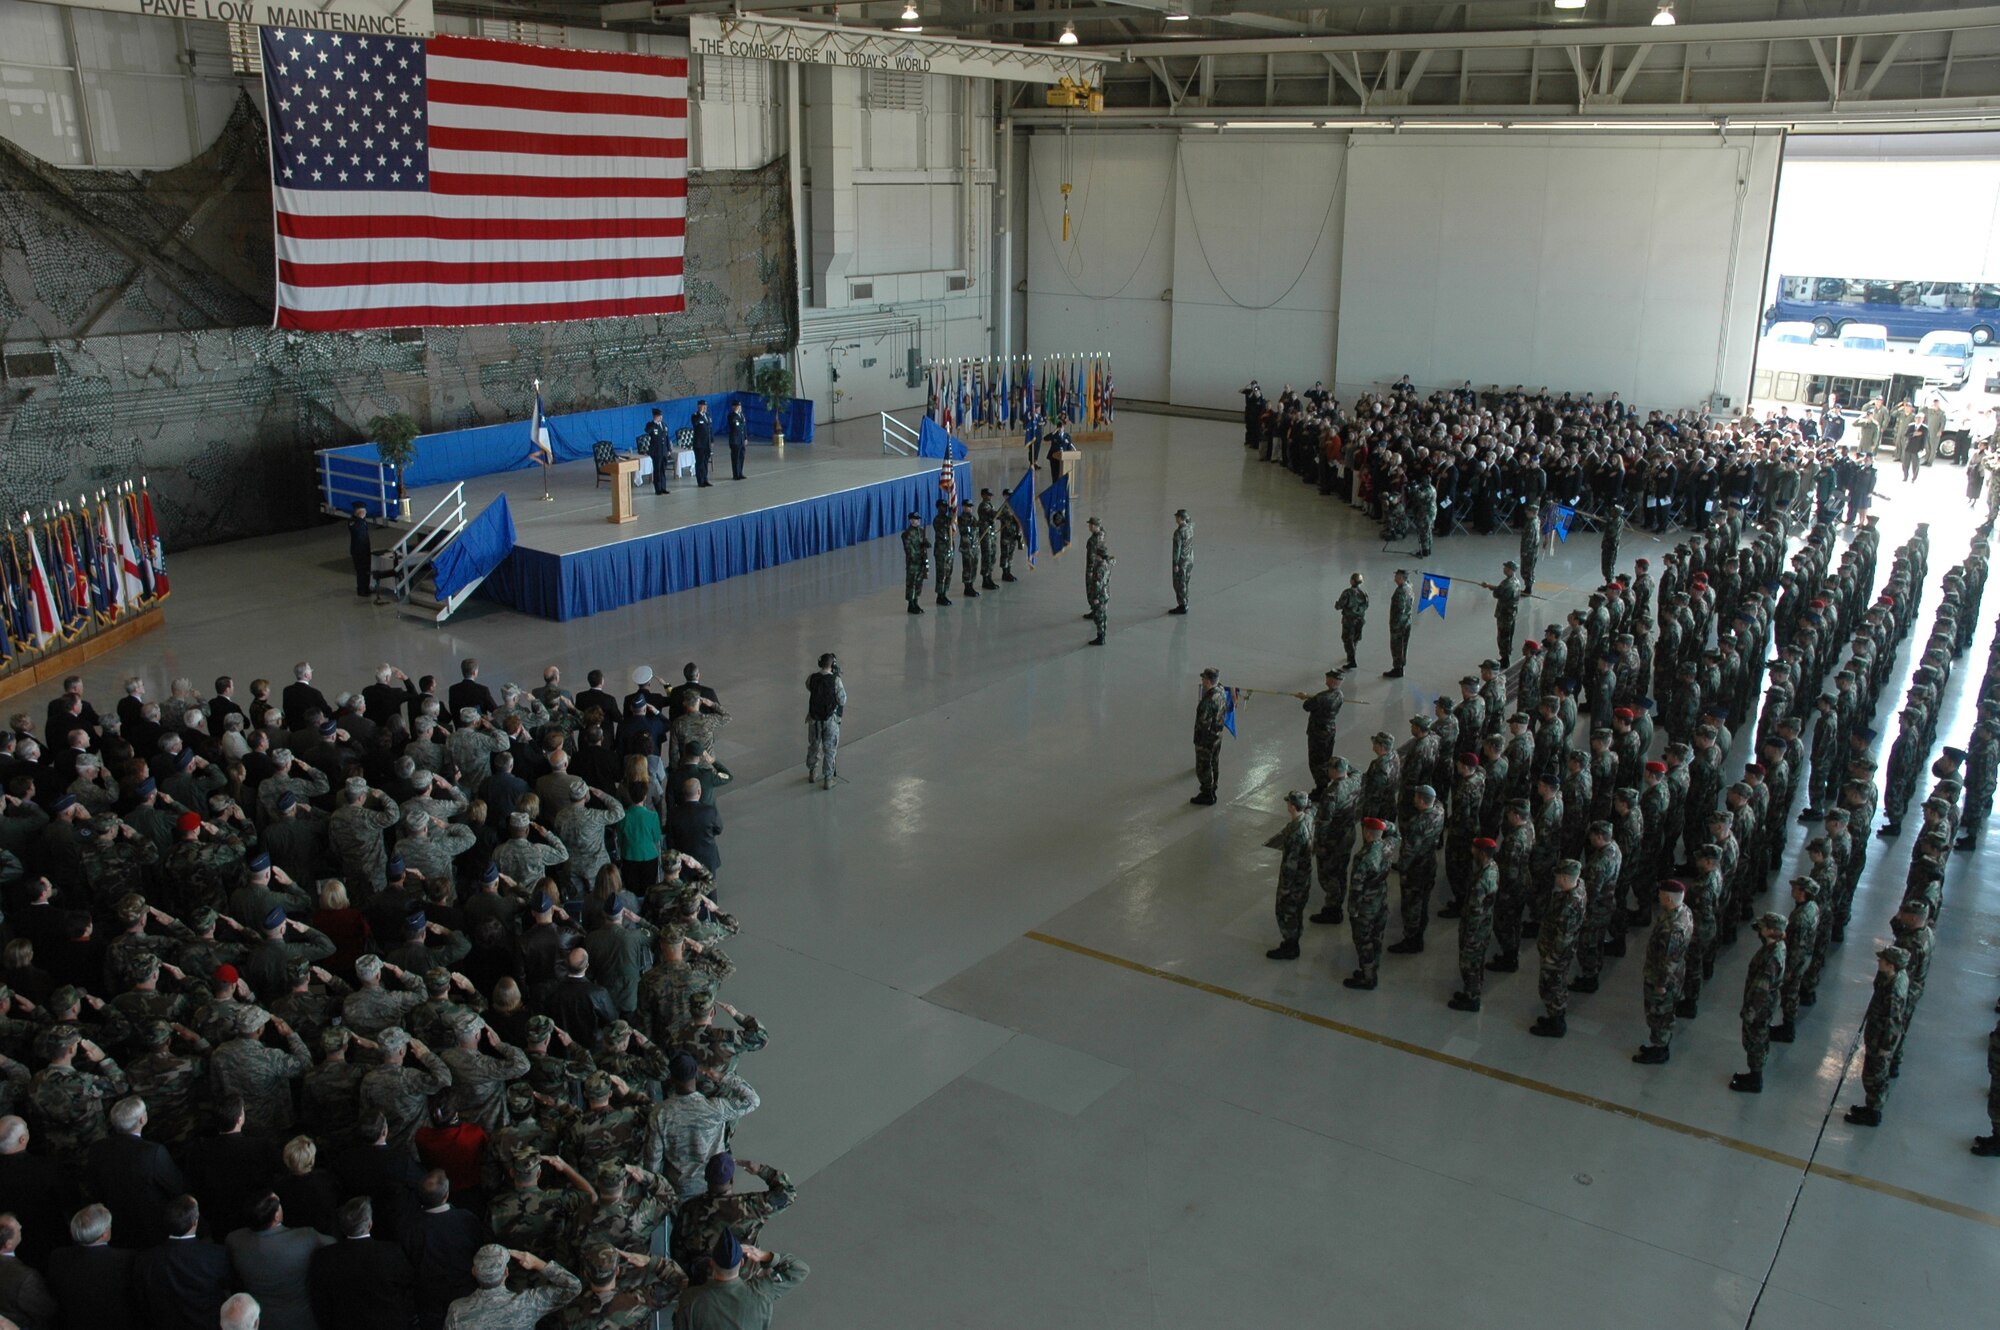 More than 1,000 Airmen and guests salute during the playing of the National Anthem at the Air Force Special Operations Command change of command ceremony Nov. 27 at Hurlburt Field, Fla. Lt. Gen. Donny Wurster assumed command of AFSOC from Lt. Gen. Mike Wooley during the ceremony. (U.S. Air Force photo/Senior Master Sgt. Tom Wood)